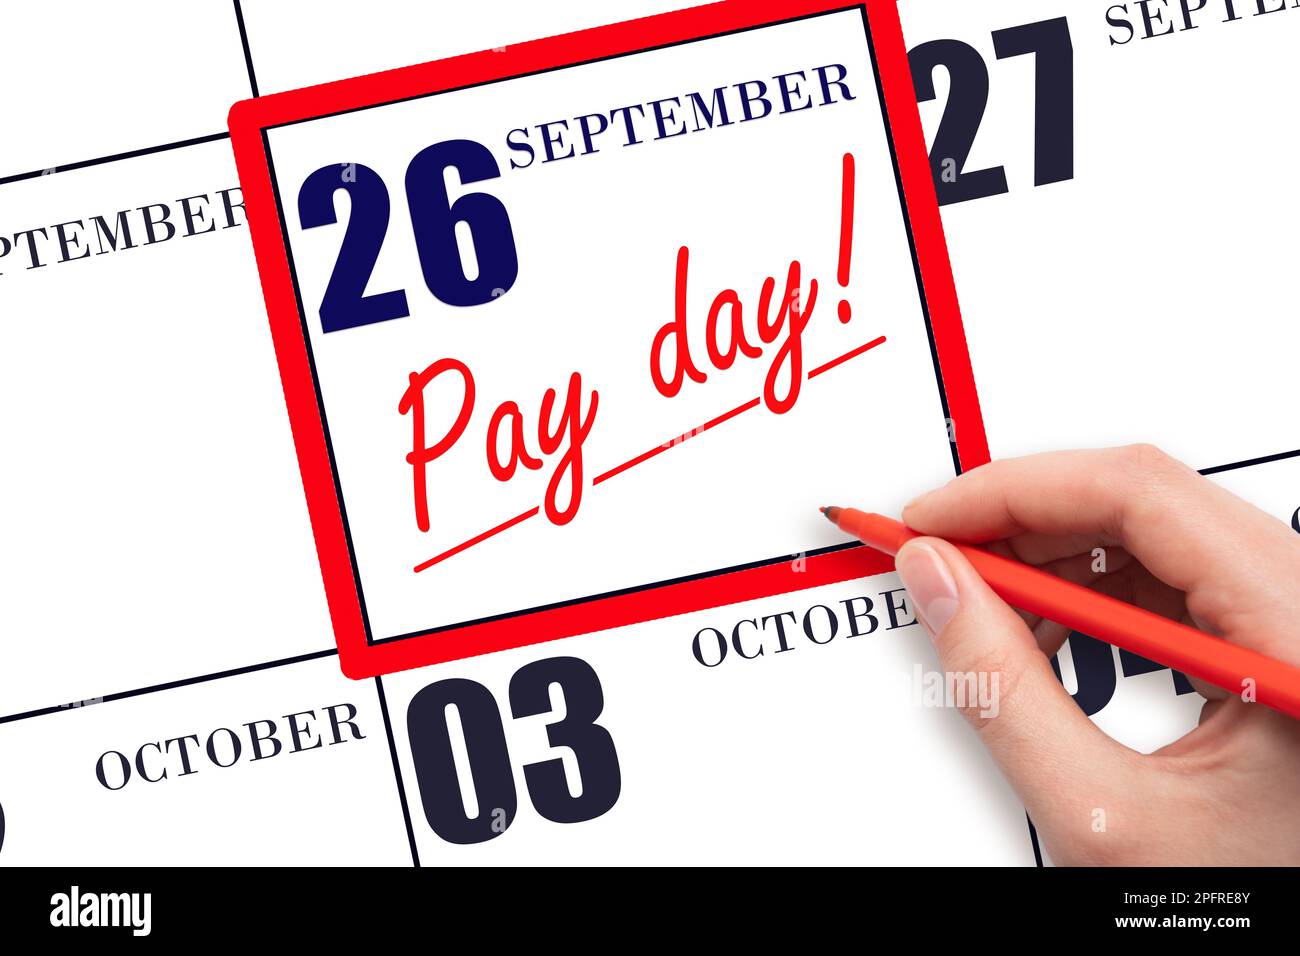 26th day of September. Hand writing text PAY DATE on calendar date September  26 and underline it. Payment due date.  Reminder concept of payment. Aut Stock Photo